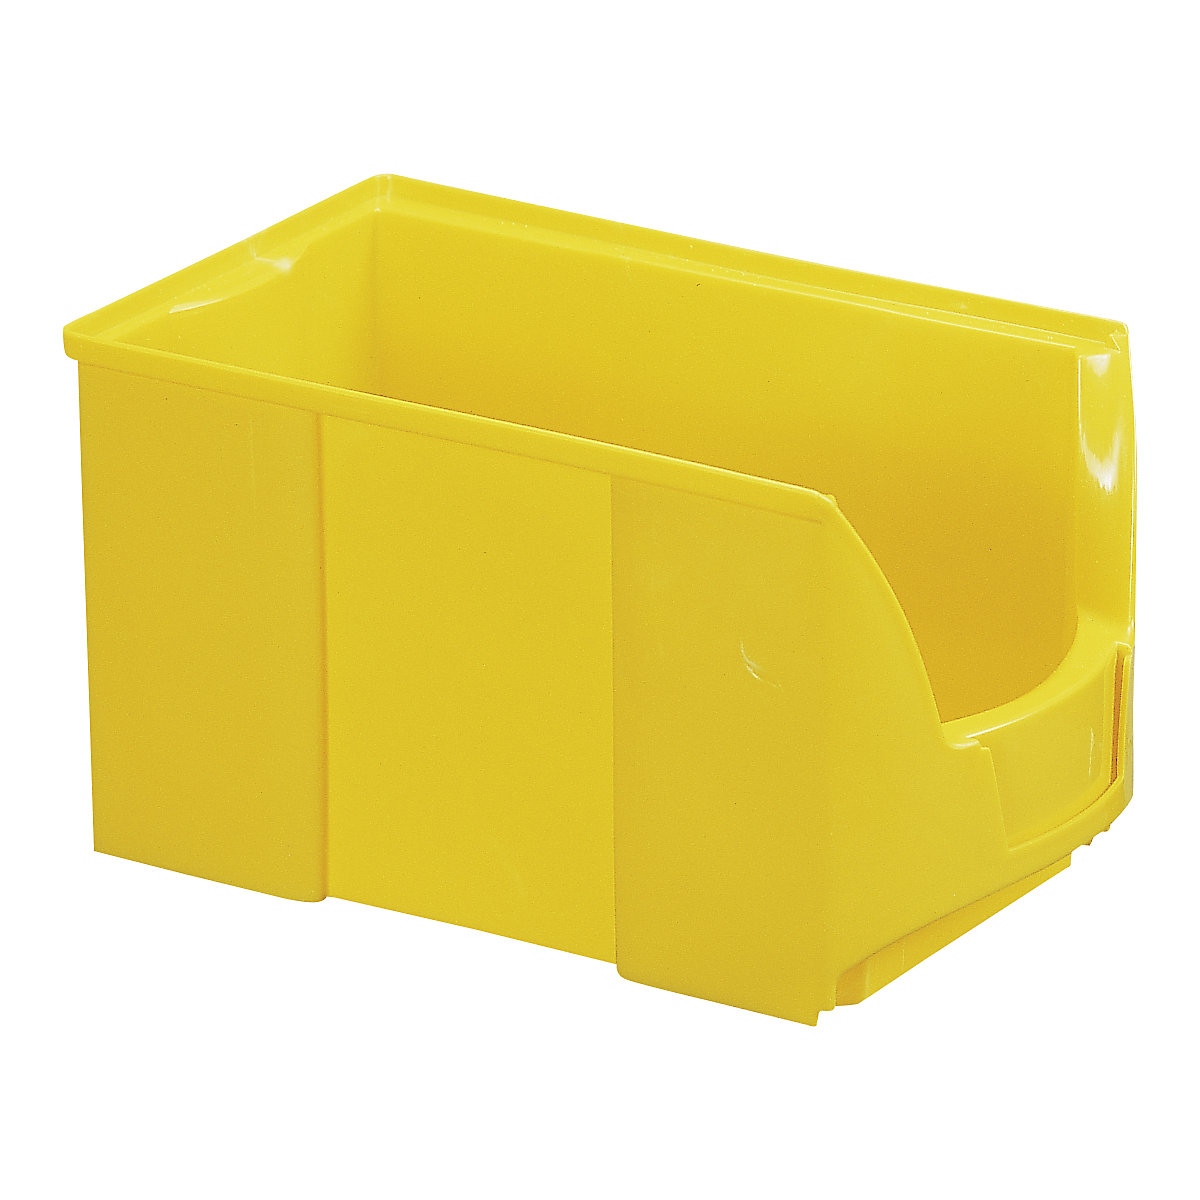 FUTURA open fronted storage bin made of polyethylene, LxWxH 360 x 208 x 201 mm, pack of 8, yellow-16